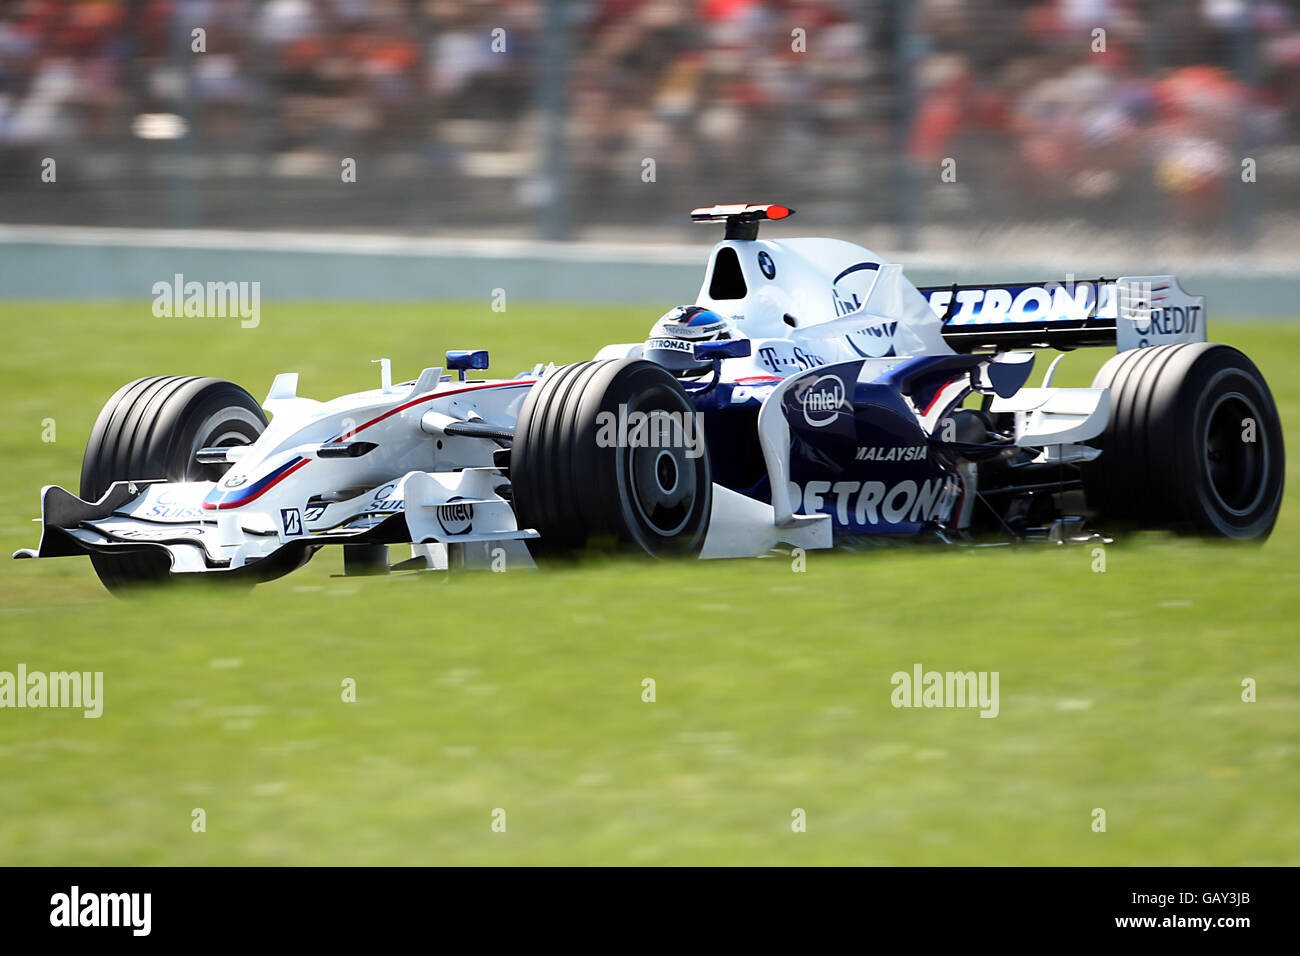 BMW Sauber's Nick Heidfeld during qualifying for the Grand Prix at Magny-Cours, Nevers, France. Stock Photo